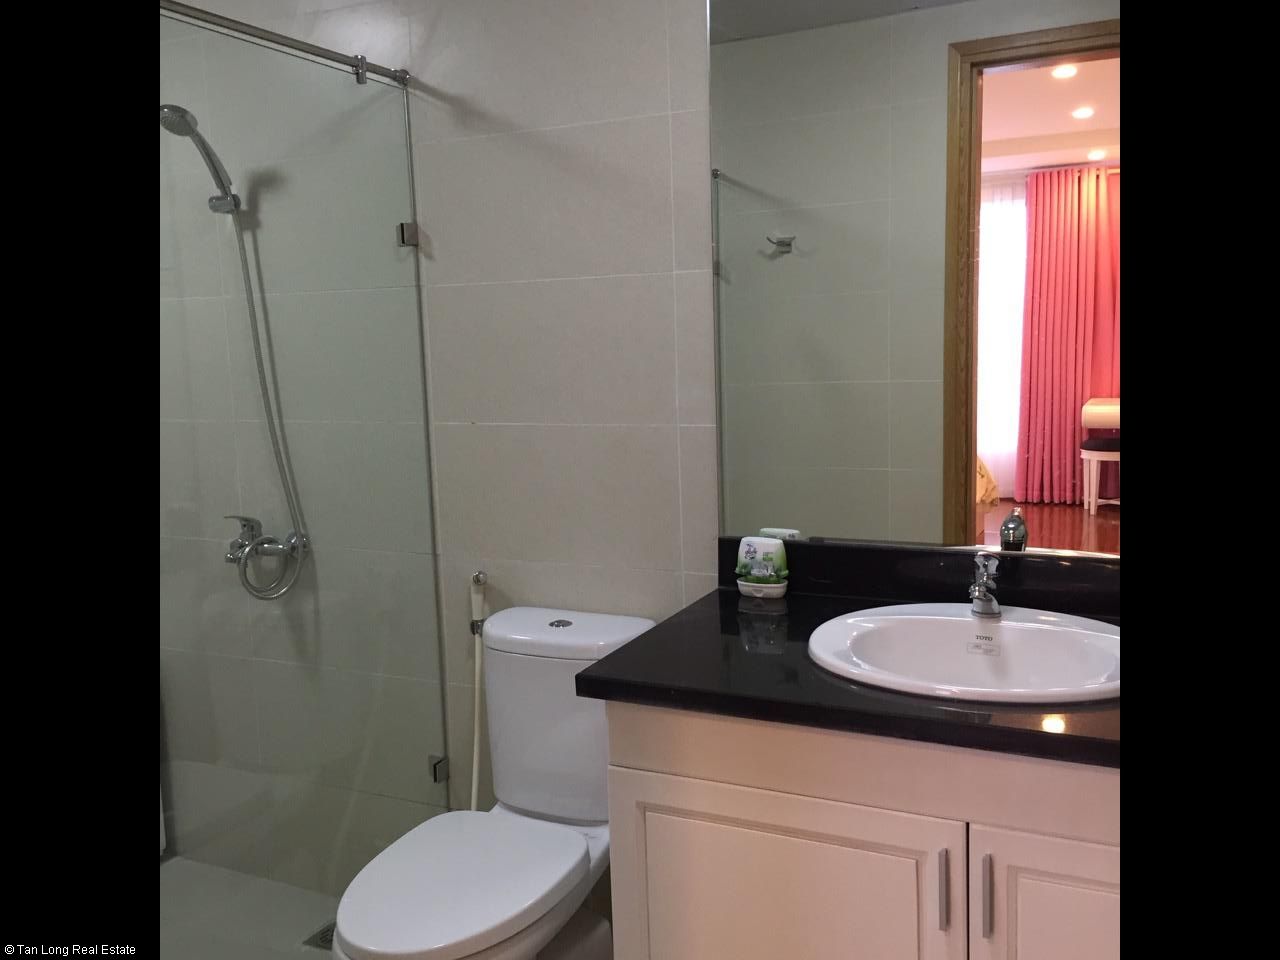 Brand new 3 bedroom furnished apartment in N04 building for rent on Hoang Dao Thuy street, Trung Hoa Nhan Chinh, Cau Giay 9